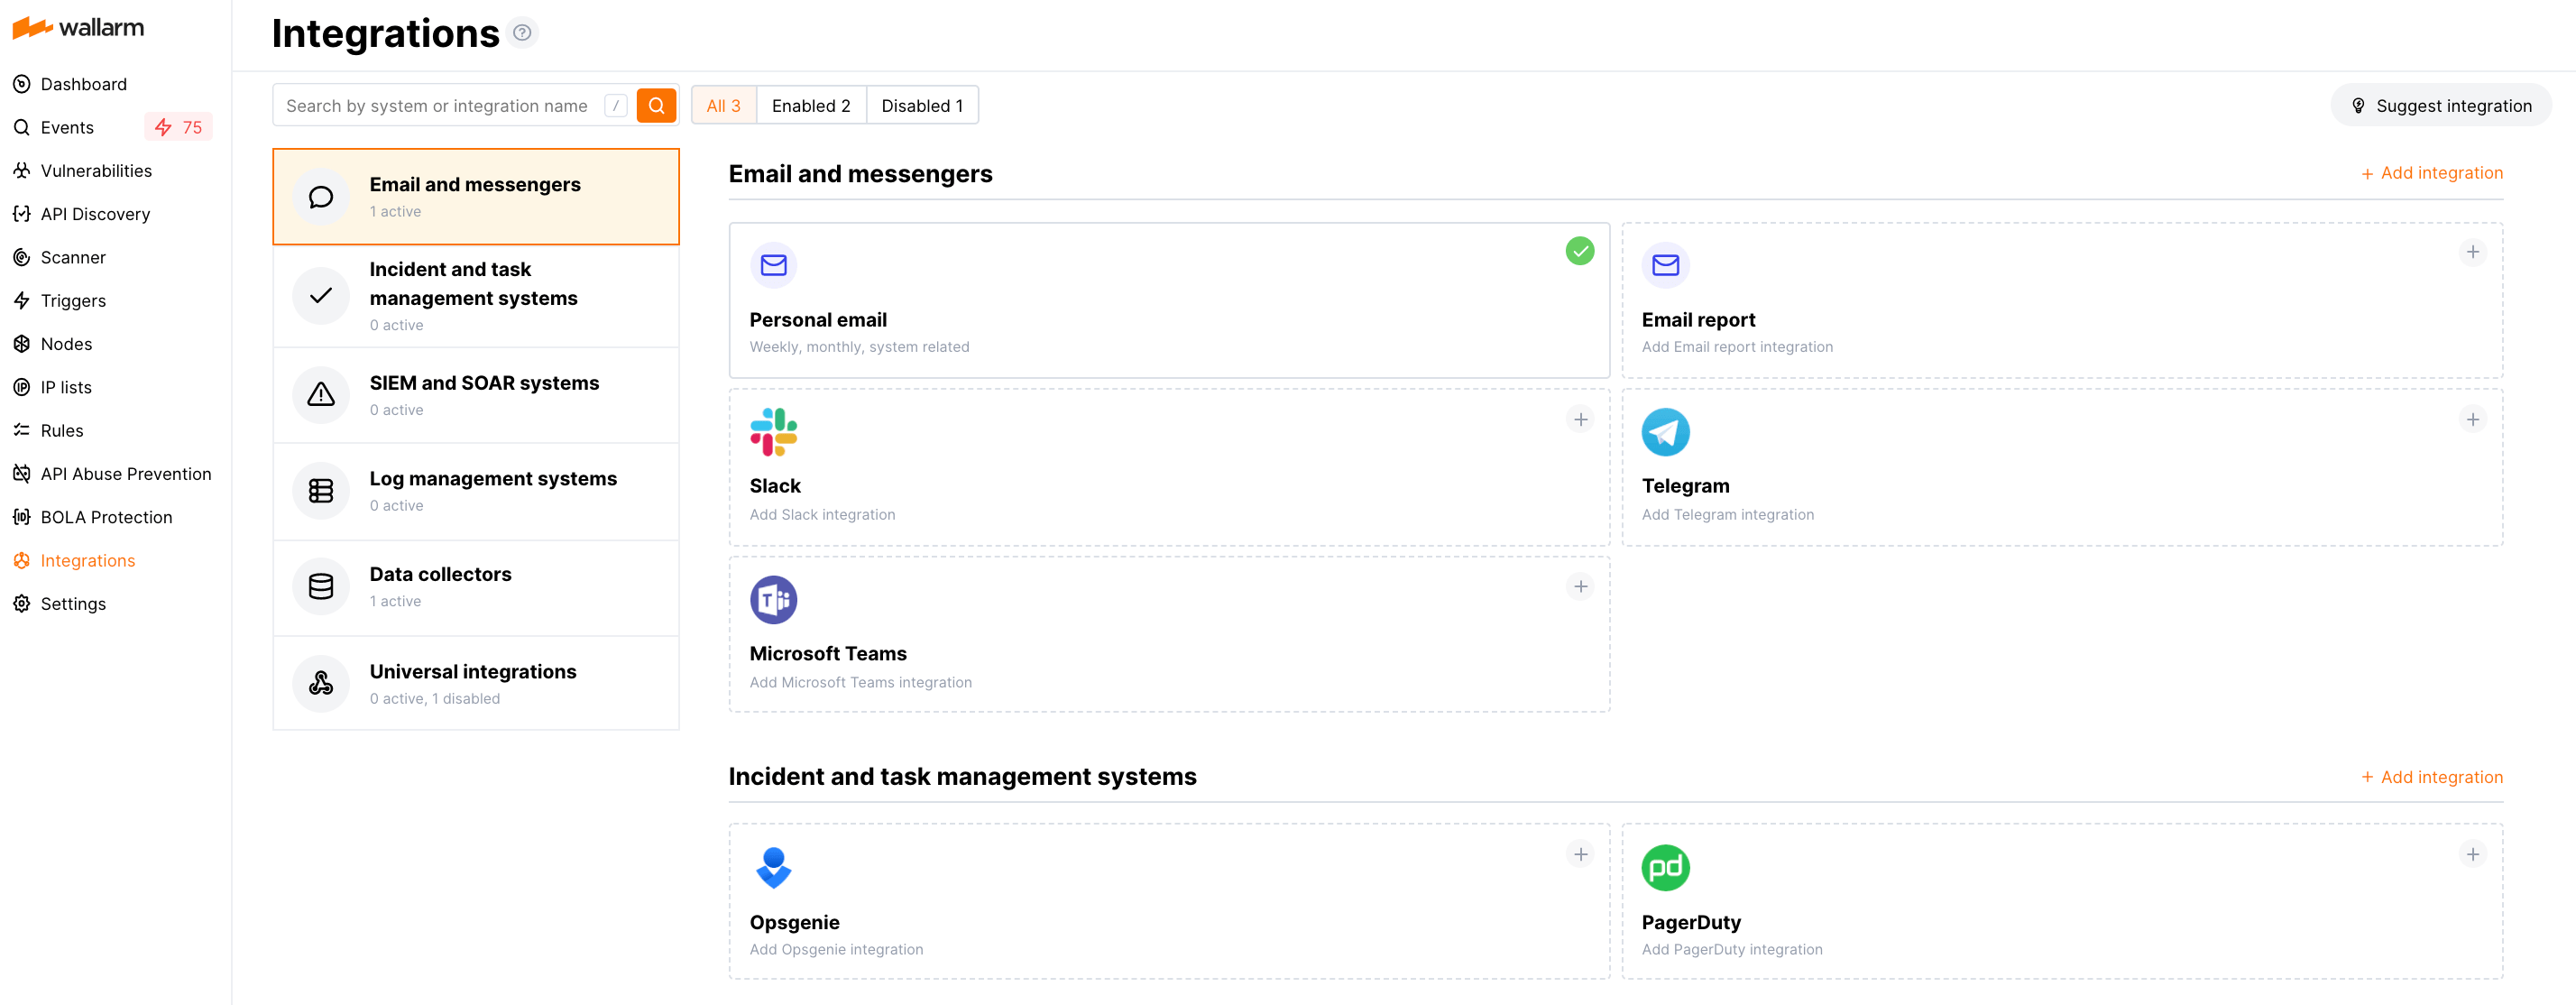 Integrations Overview